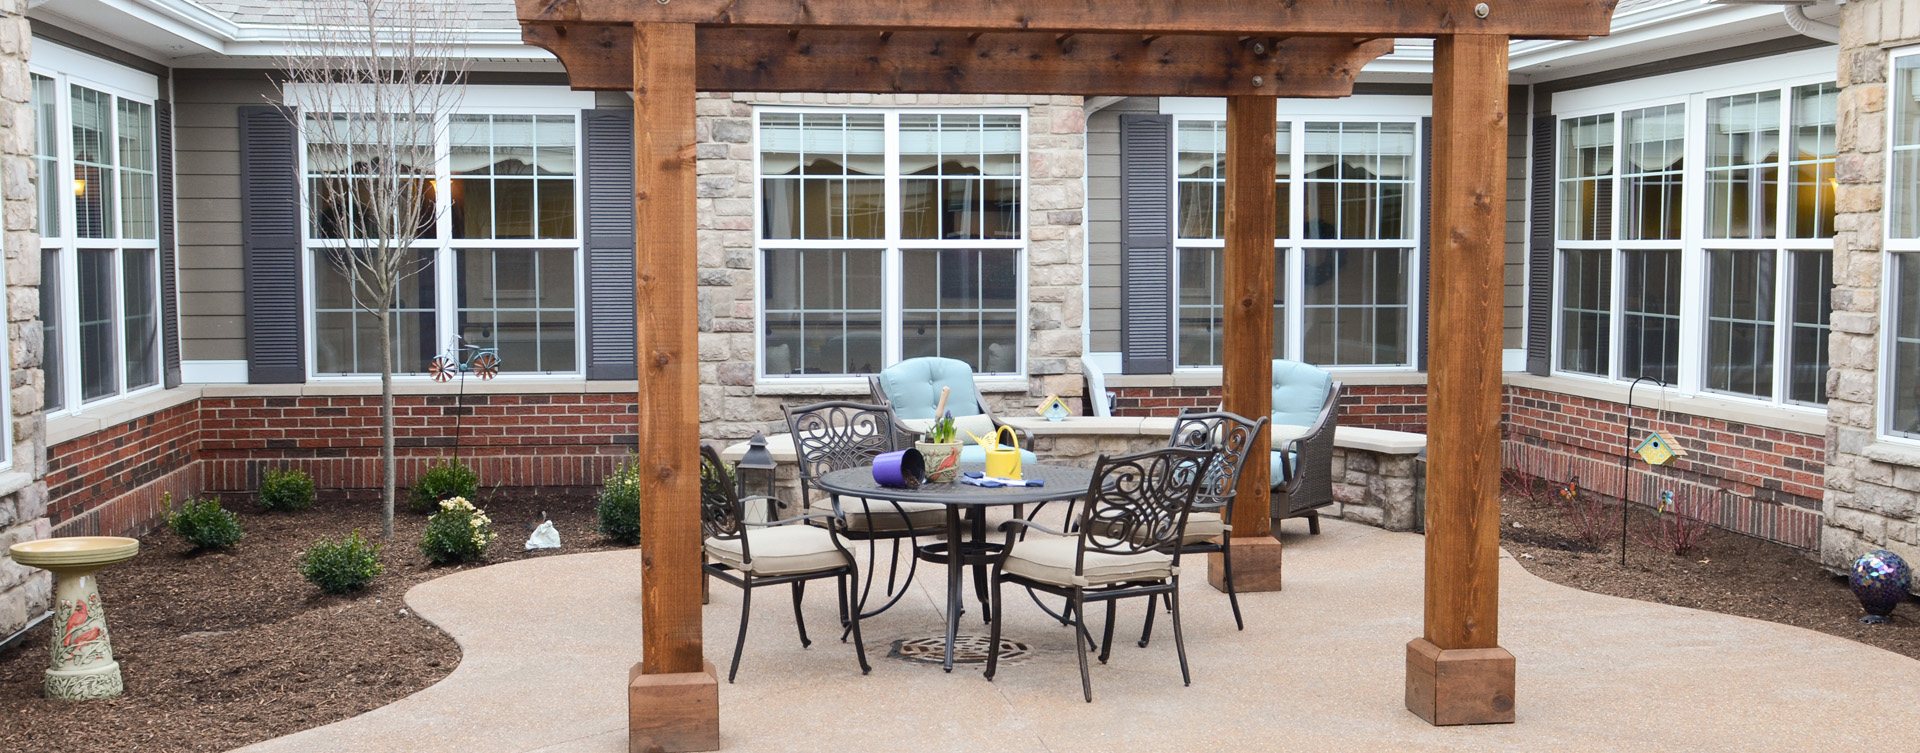 Residents with dementia can enjoy a traveling path, relaxed seating and raised garden beds in the courtyard at Bickford of Gurnee